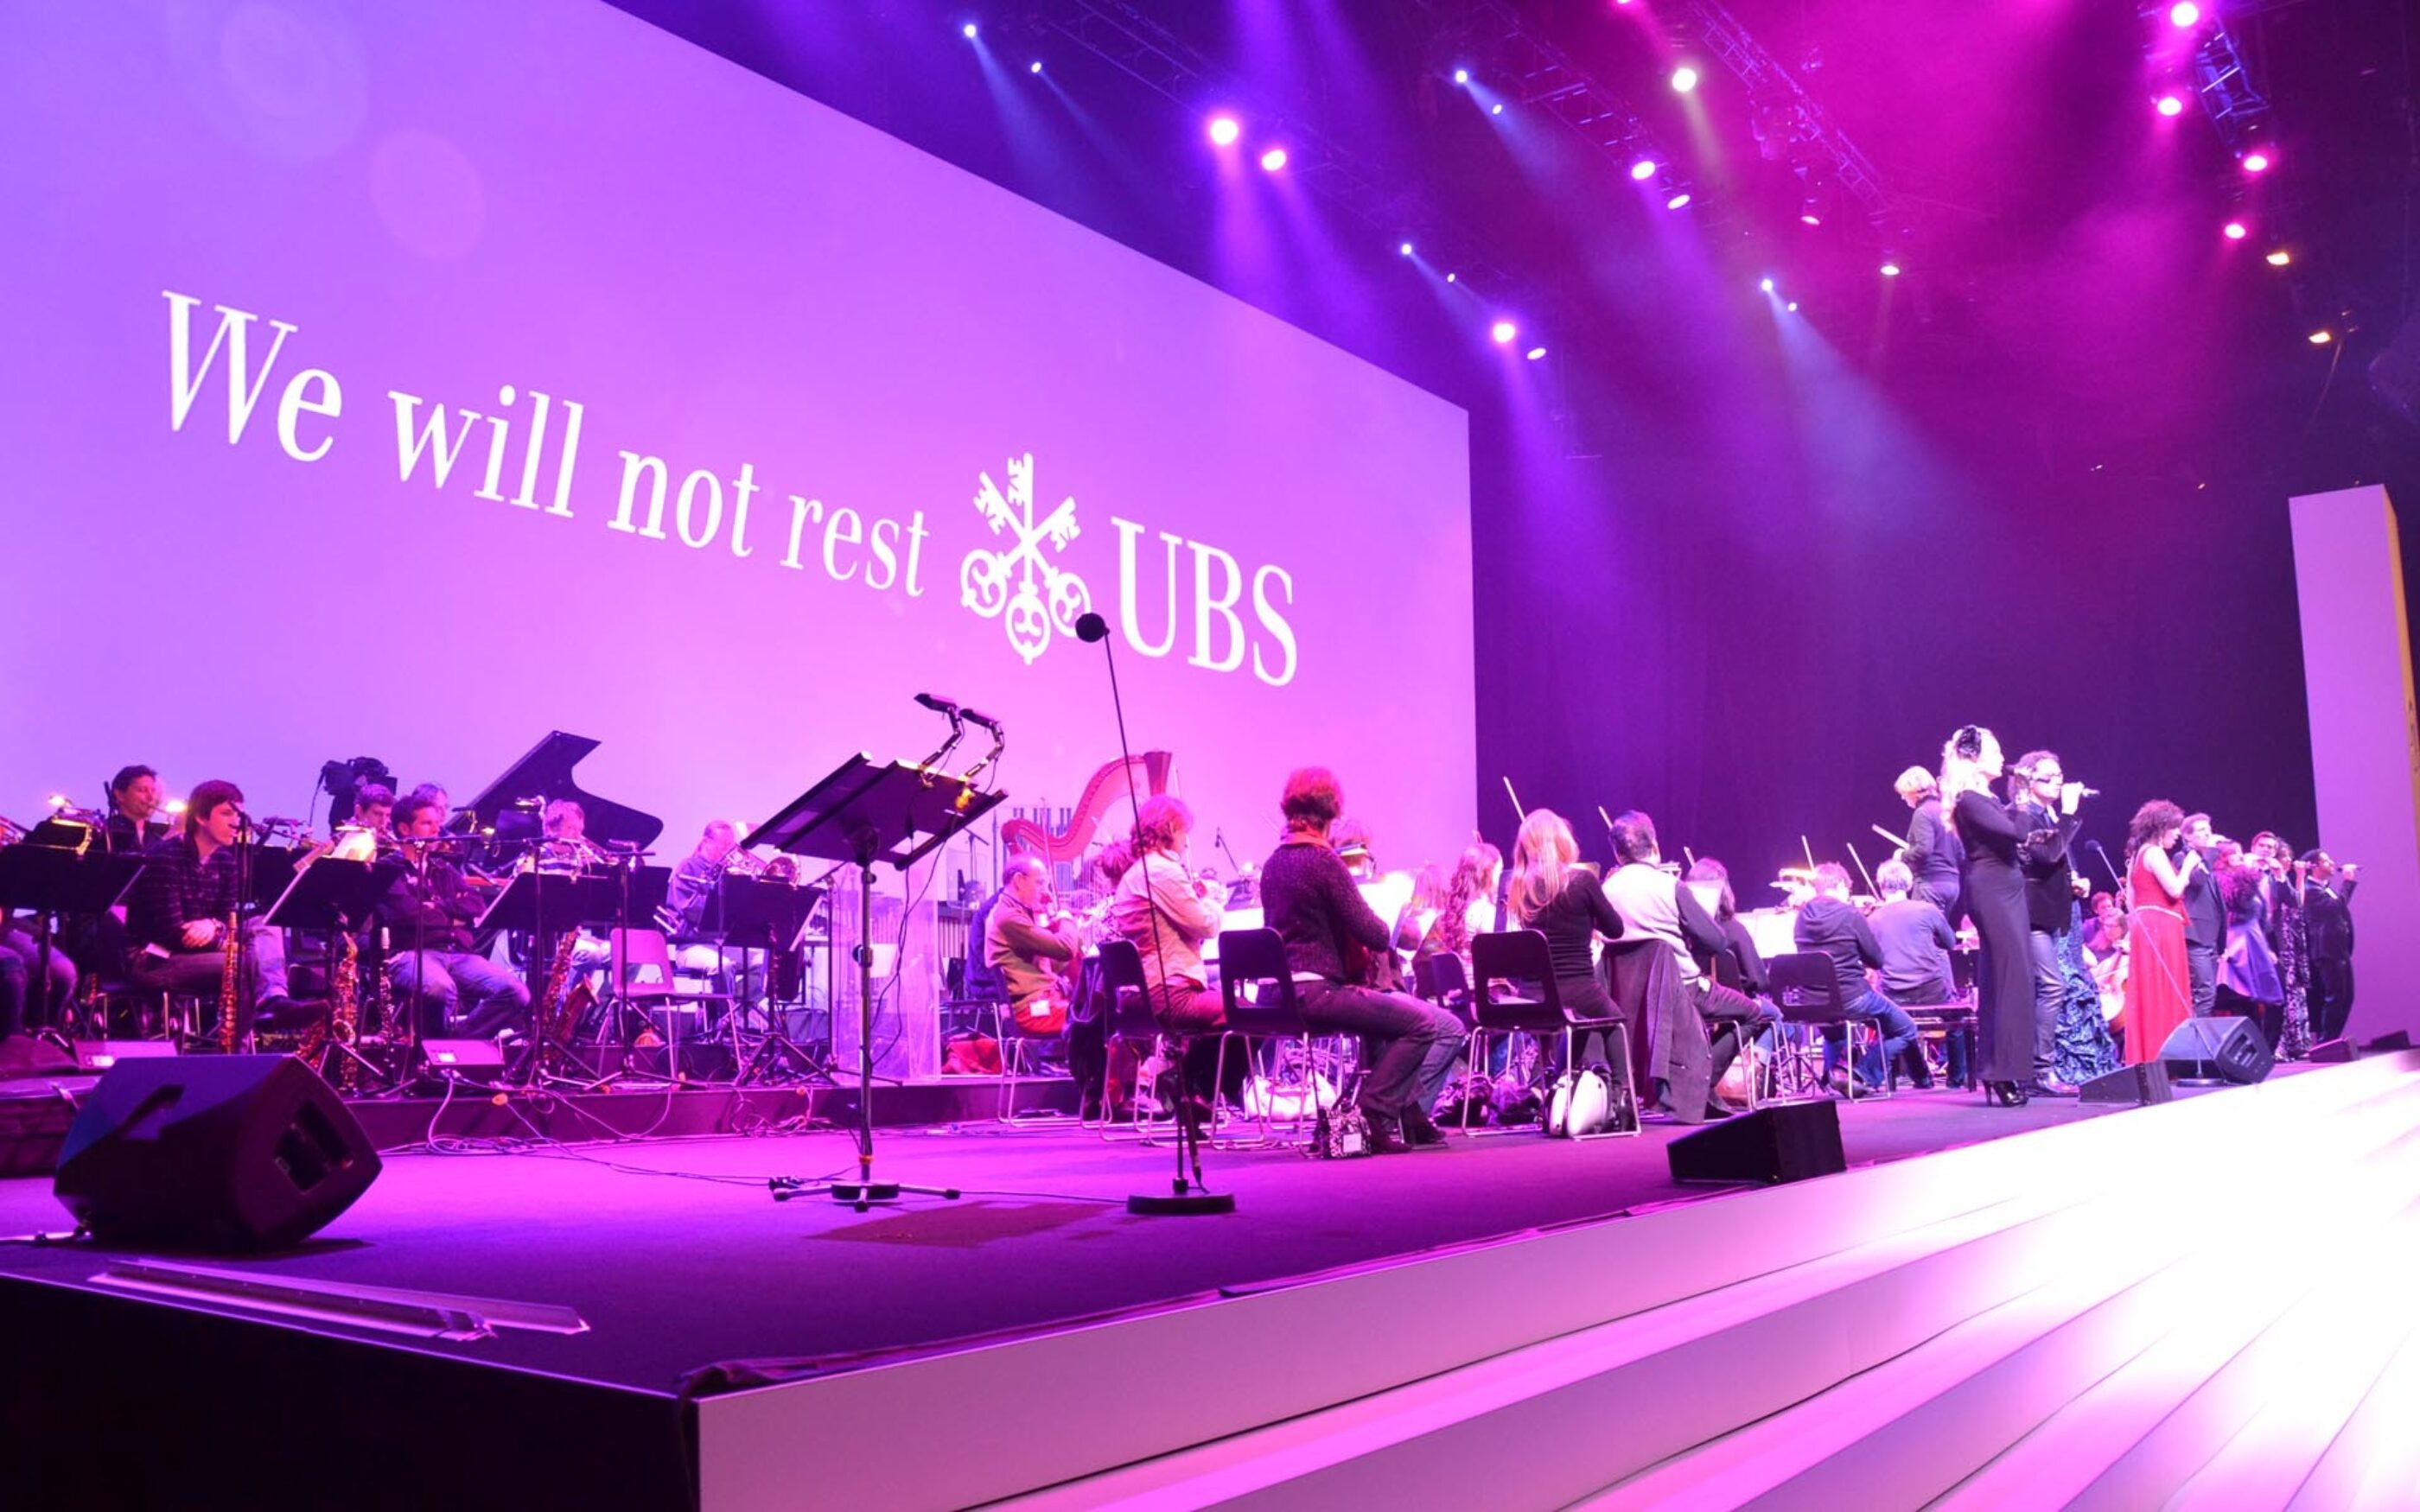 Ubs gala corporate event stage